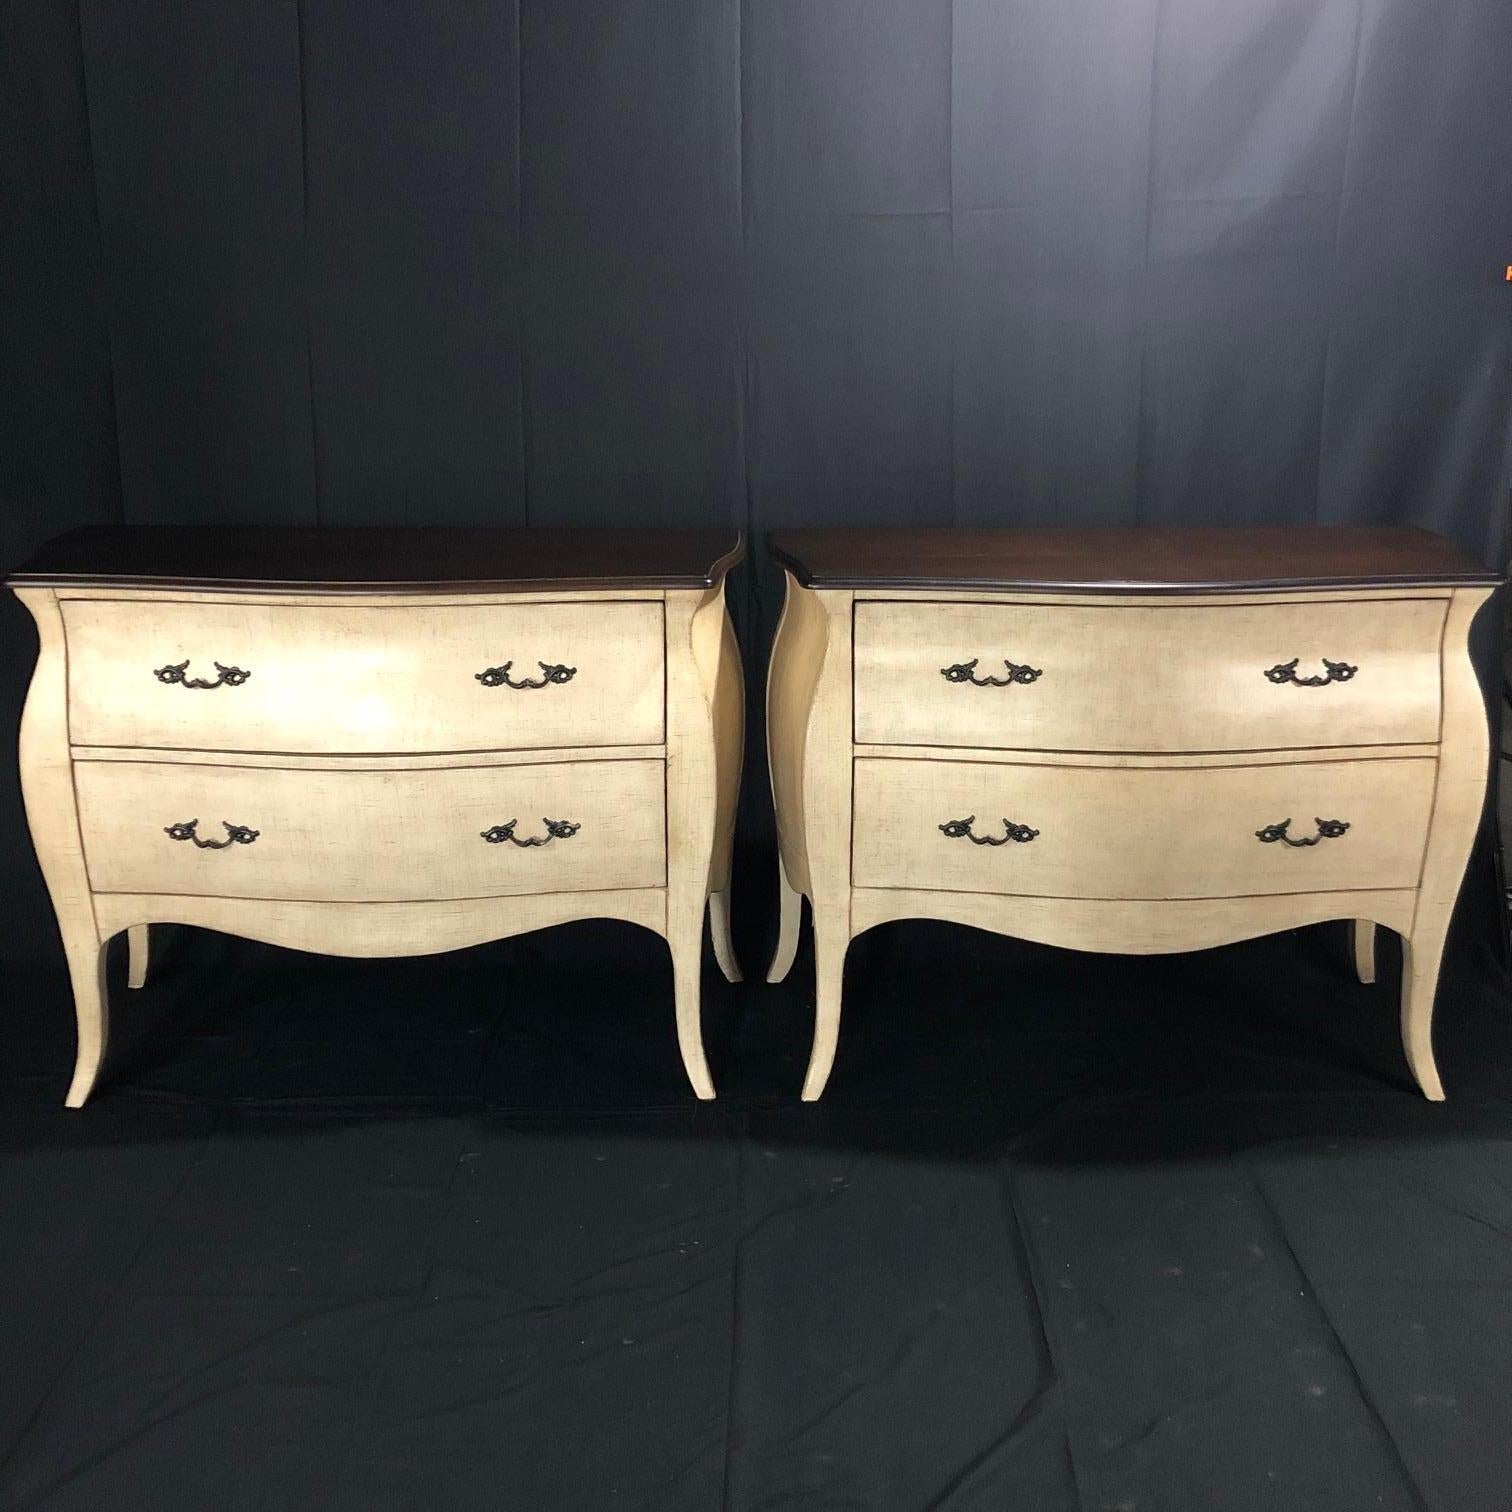 Beautiful pair of painted walnut commodes in the French Louis XV style having shaped stained walnut tops with lamb’s tongue molding and canted carved corners. There is brass aged hardware on the two drawers and the off-white paint treatment looks